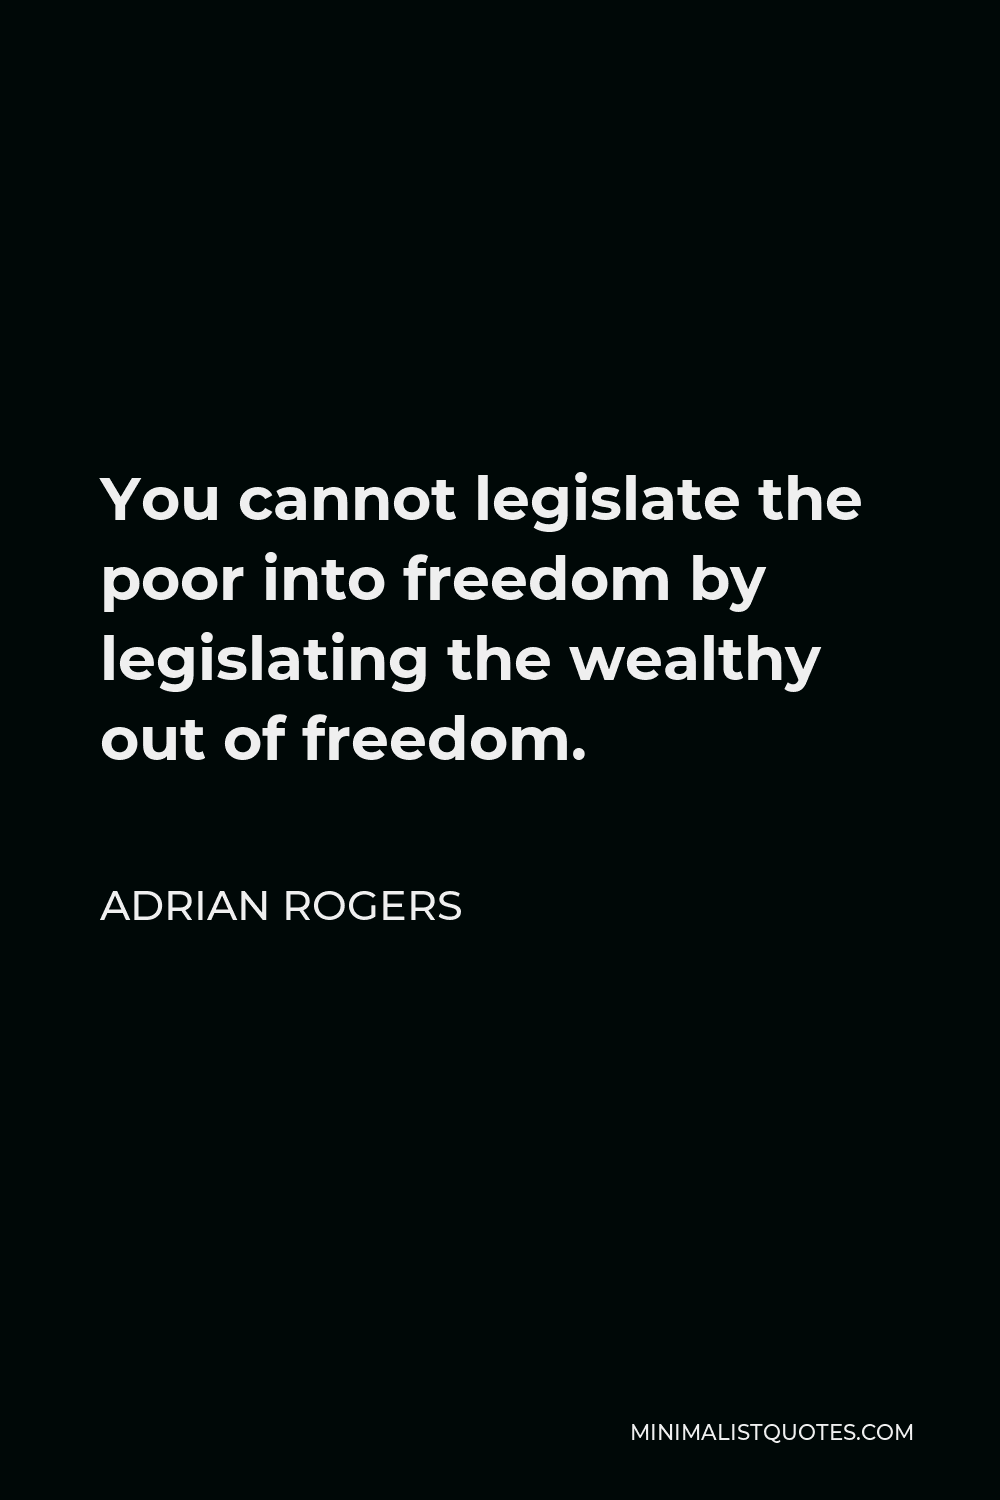 Adrian Rogers Quote - You cannot legislate the poor into freedom by legislating the wealthy out of freedom.